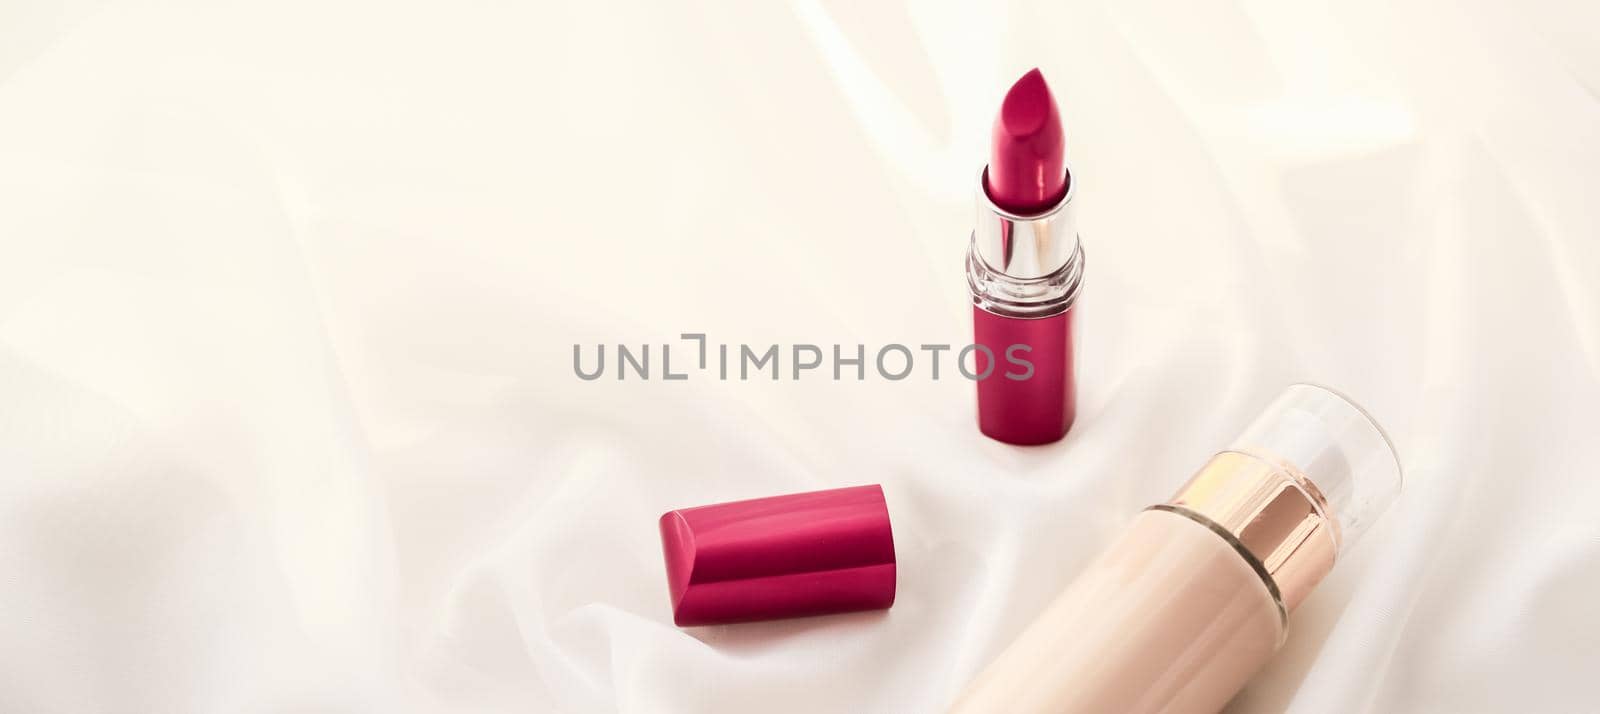 Cosmetic branding, glamour and skincare concept - Beige tonal cream bottle make-up fluid foundation base and red lipstick on silk background, cosmetics products as luxury beauty brand holiday design